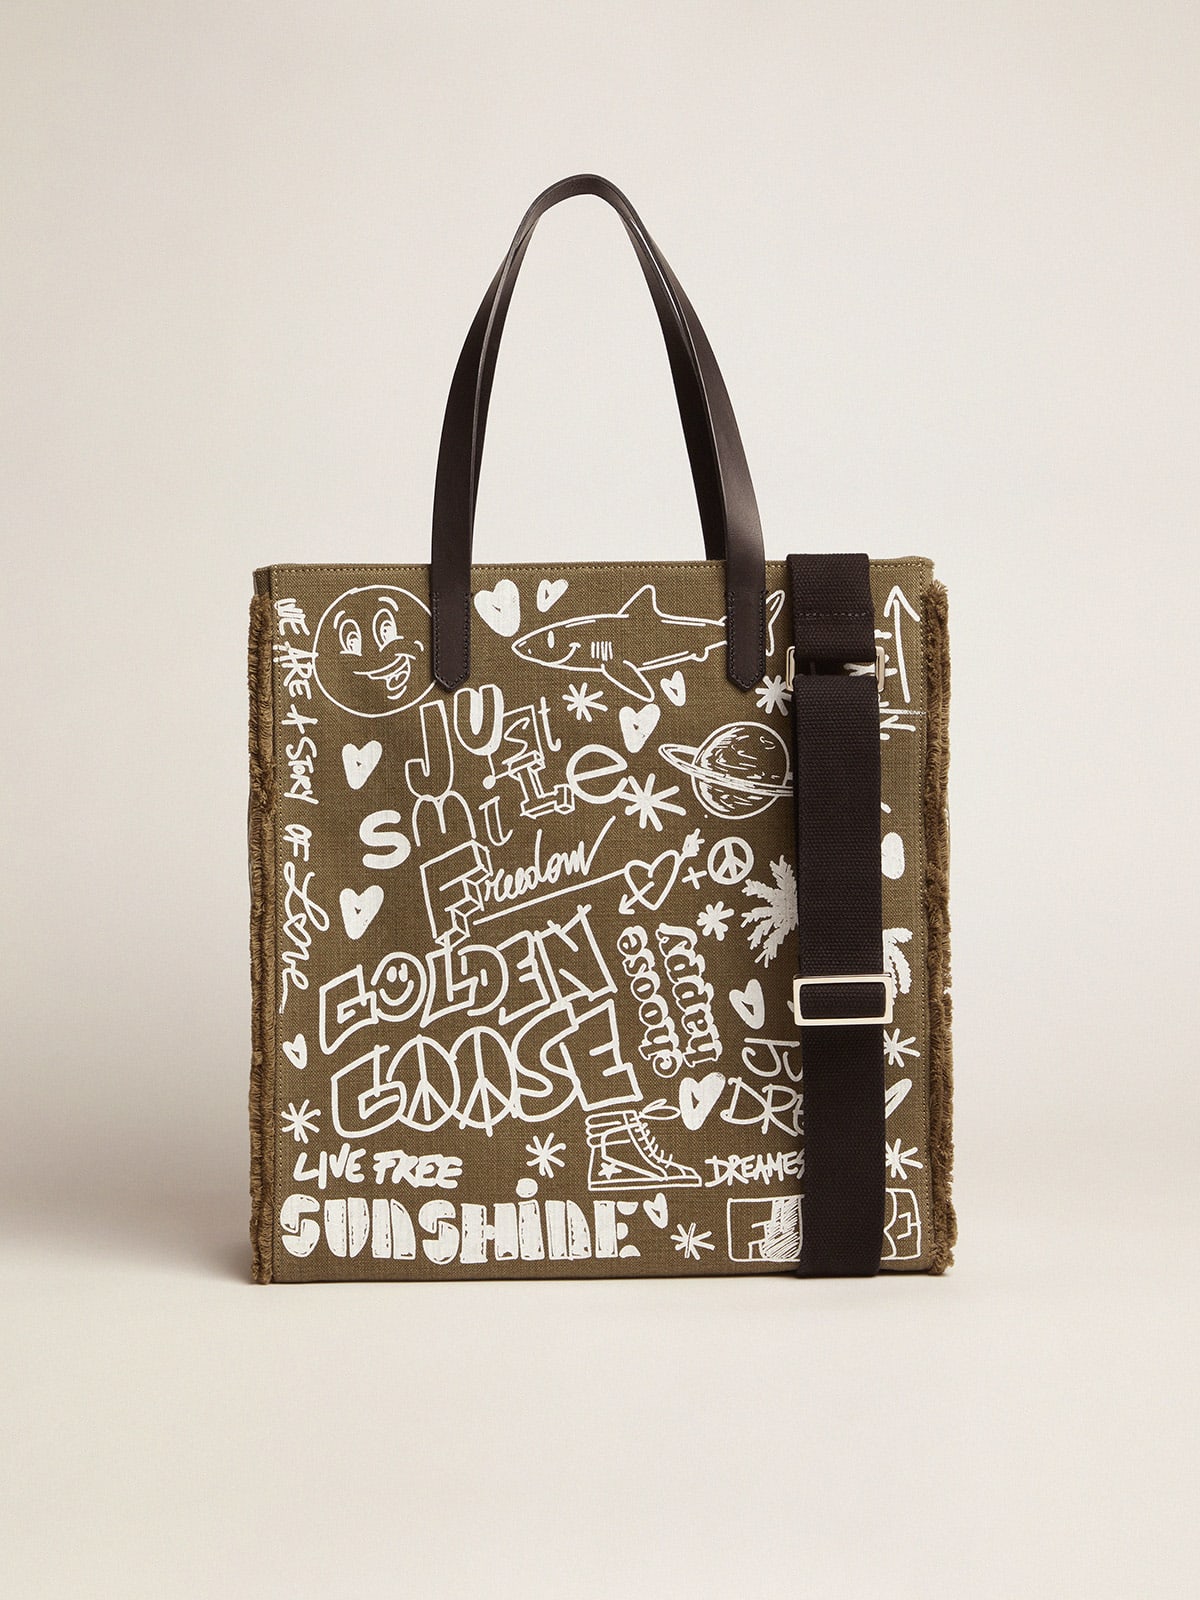 Golden Goose - North-South California Bag in military green canvas with graffiti in 